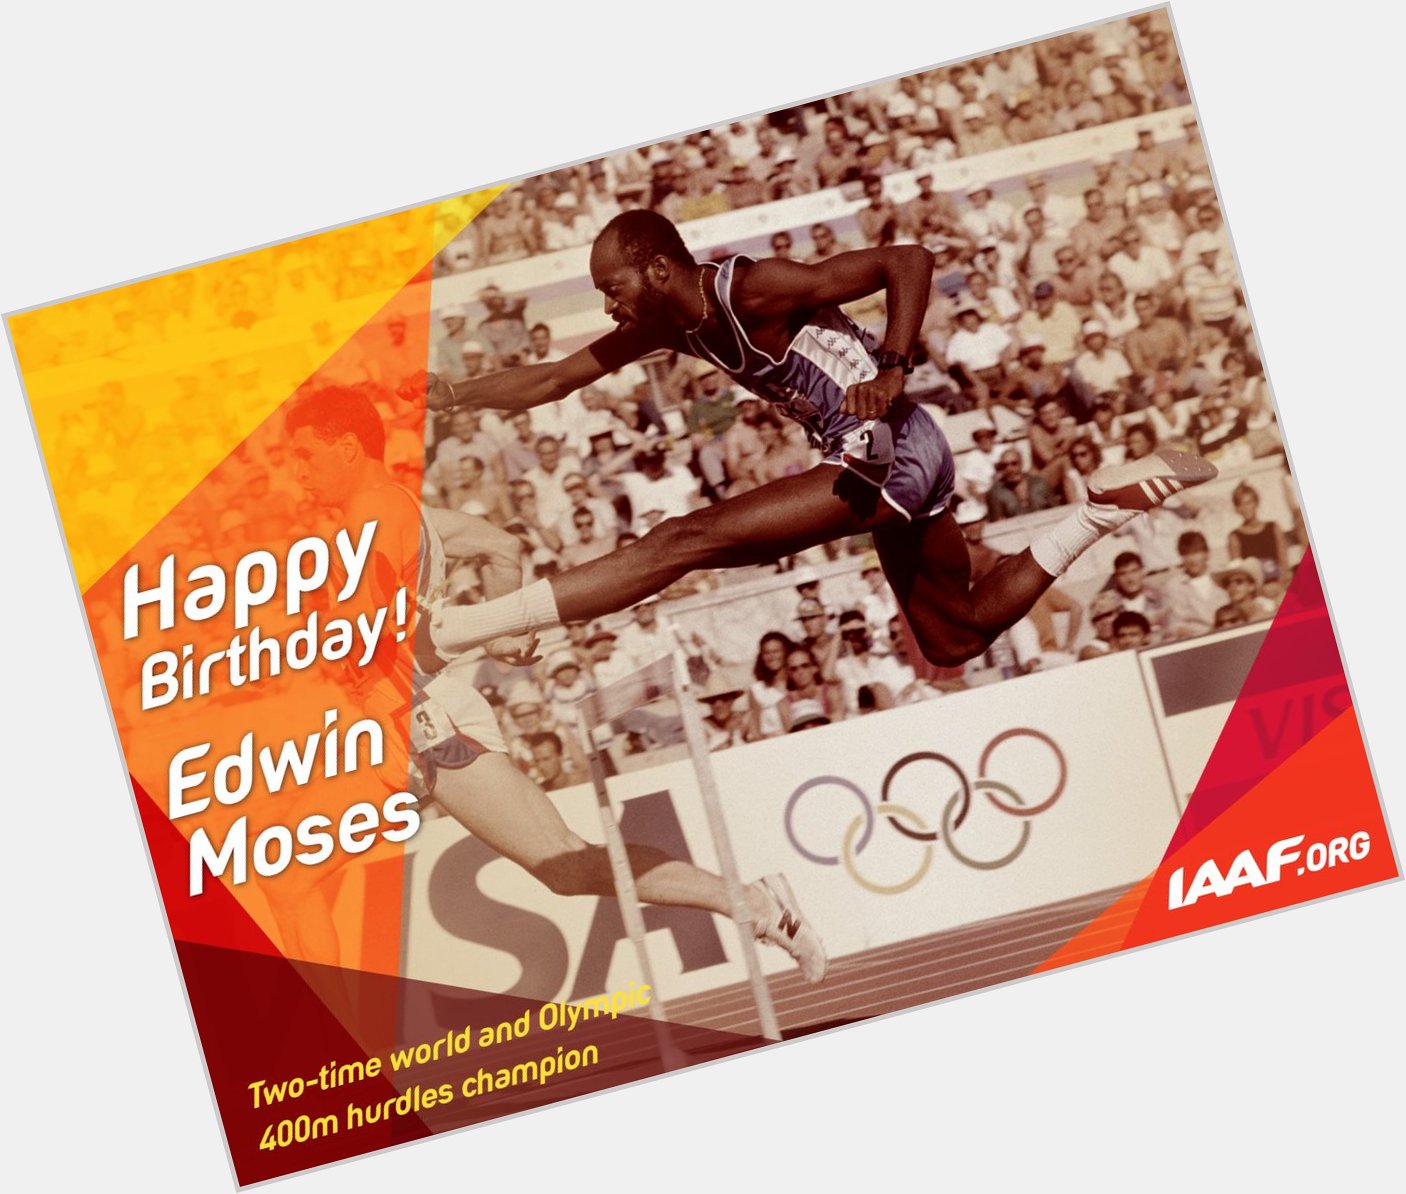 Happy birthday to former 400m hurdles world record holder Edwin Moses. 